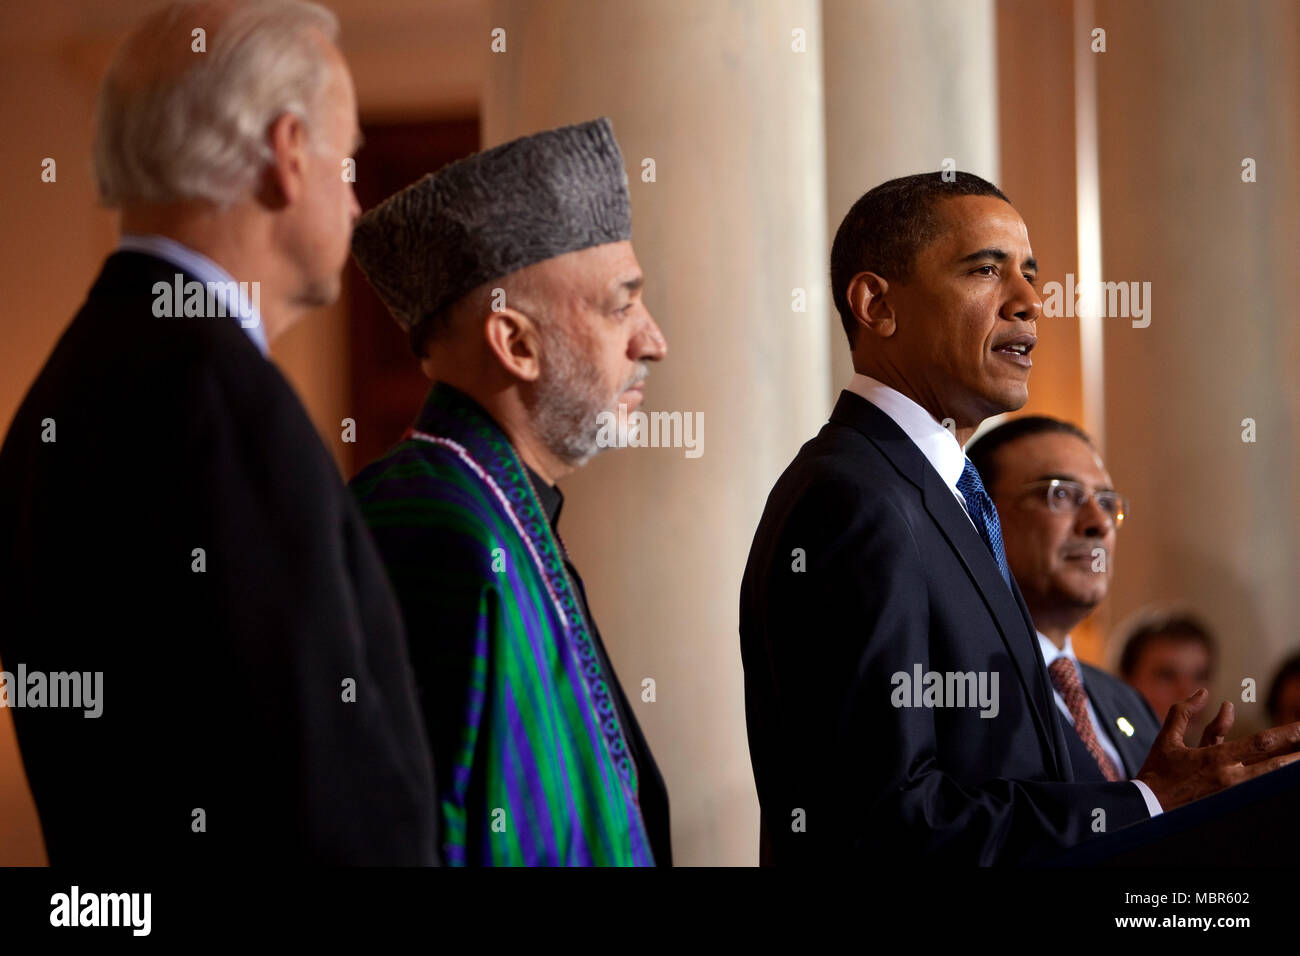 President Barack Obama with Afghanistan President Hamid Karzai, Pakistan President Asif Ali Zardari and Vice President Joe Biden during a statement in the Grand Foyer of the White House May 4, 2009.  Official White House Photo By Lawrence Jackson Stock Photo